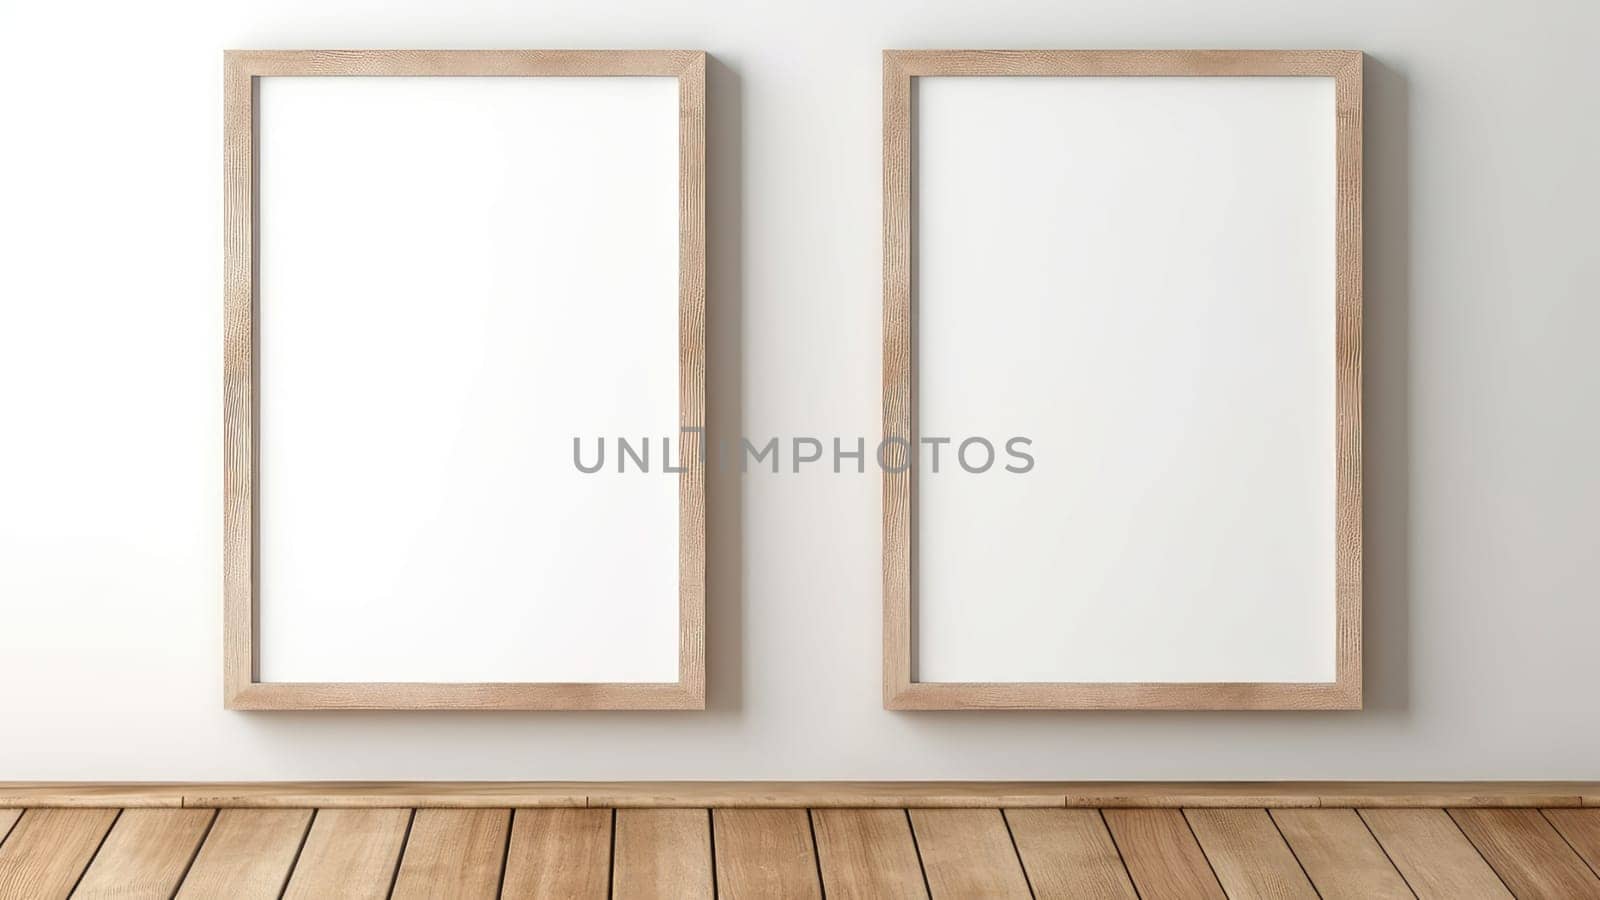 3D rendering of two empty gallery borders hang on a wall. The empty borders are simple and uncluttered, made of wood with a smooth finish. The wall is painted white, providing a clean and neutral backdrop for the borders.